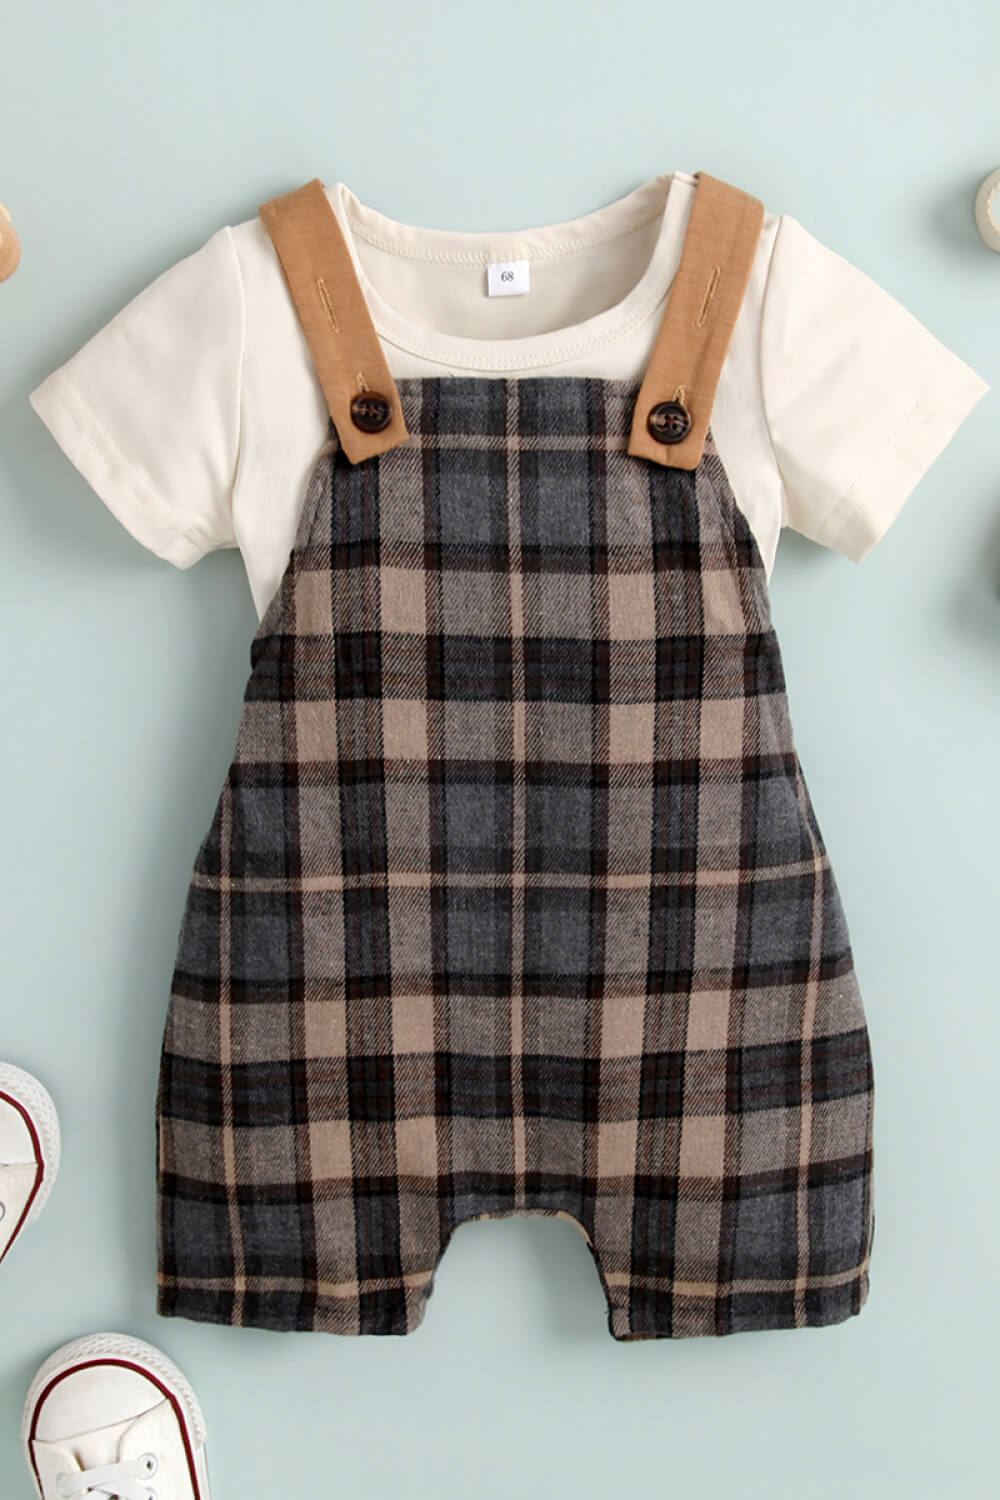 Baby Round Neck Tee and Plaid Overalls Set Baby JT's Designer Fashion